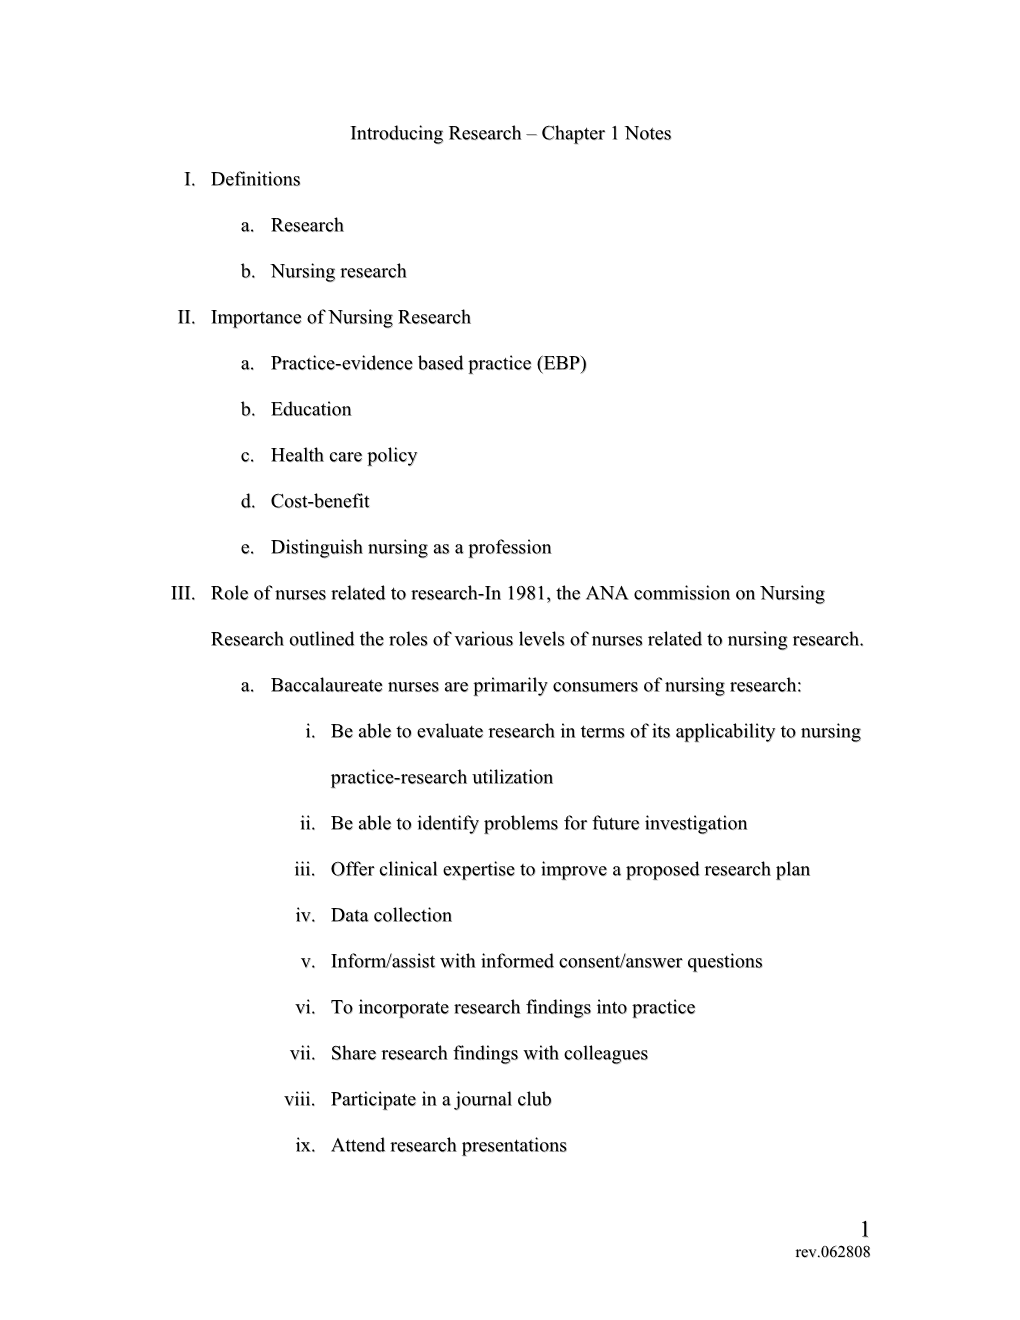 Introduction to Nursing Research Chapter 1 Notes